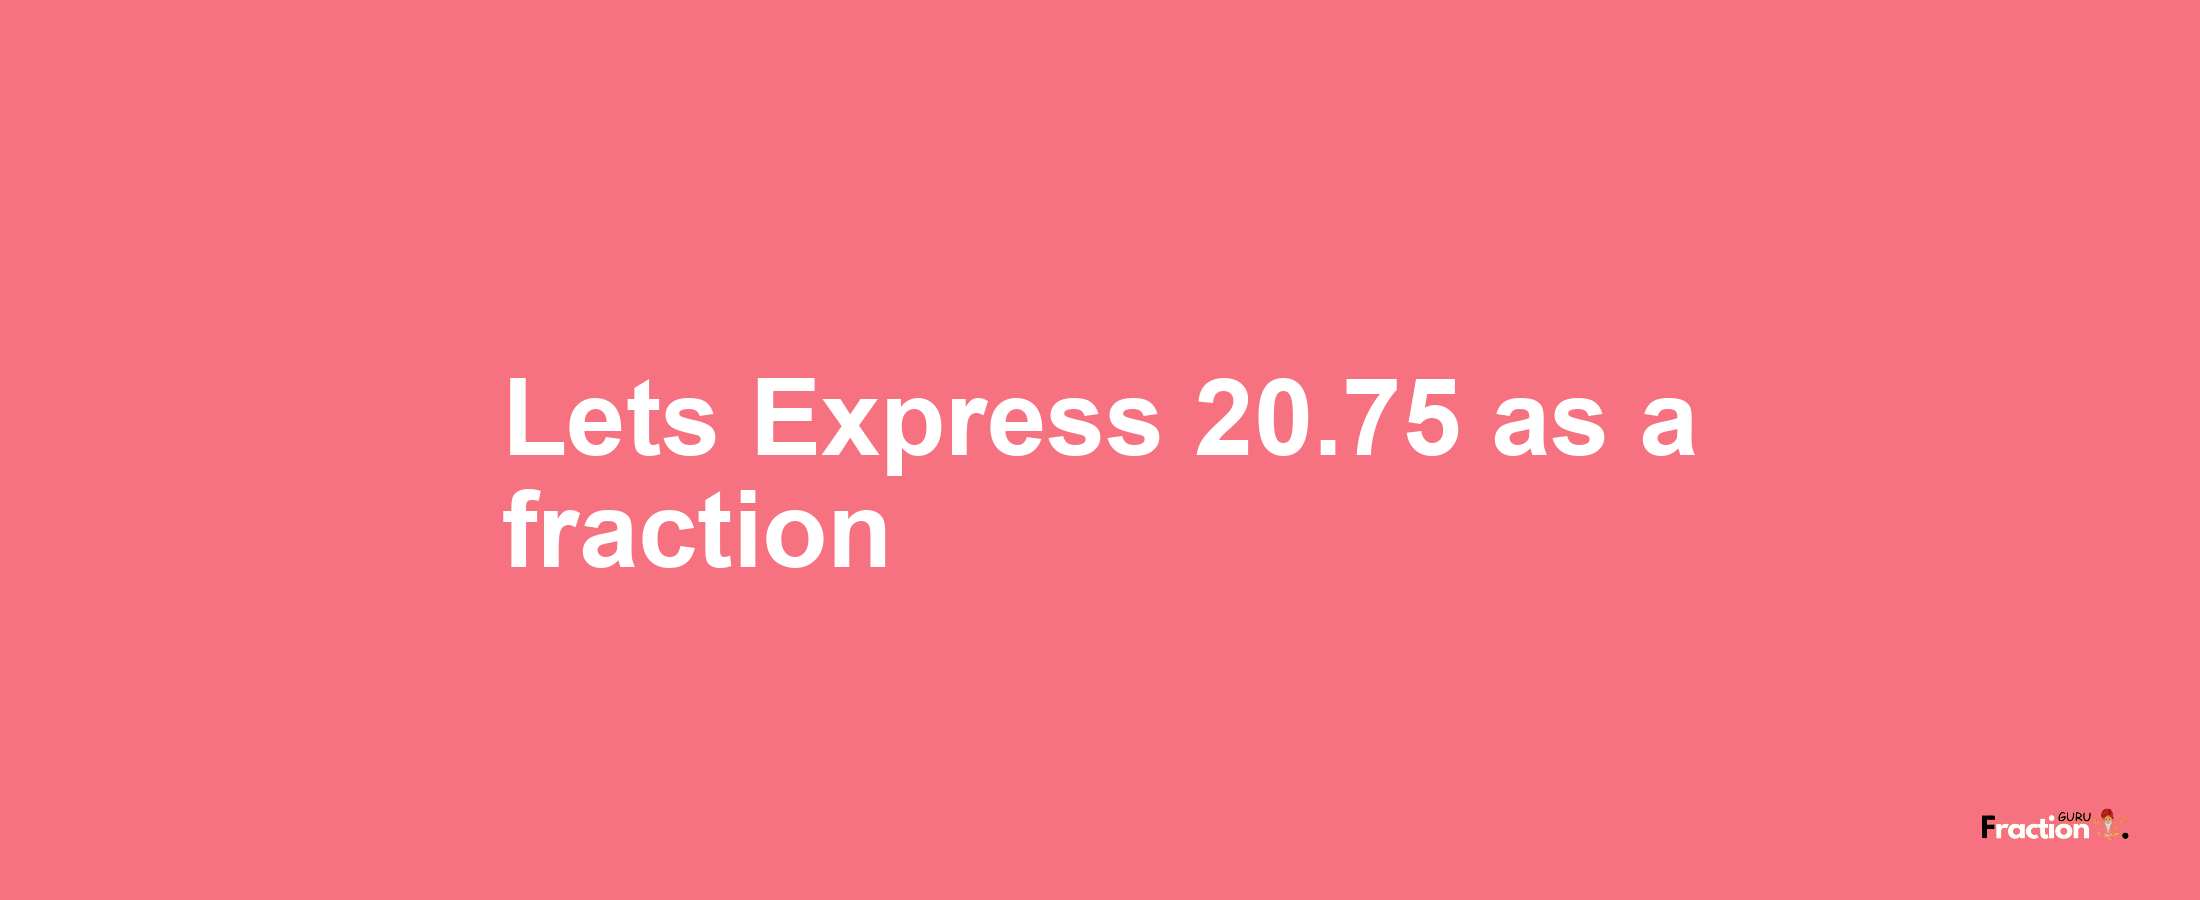 Lets Express 20.75 as afraction